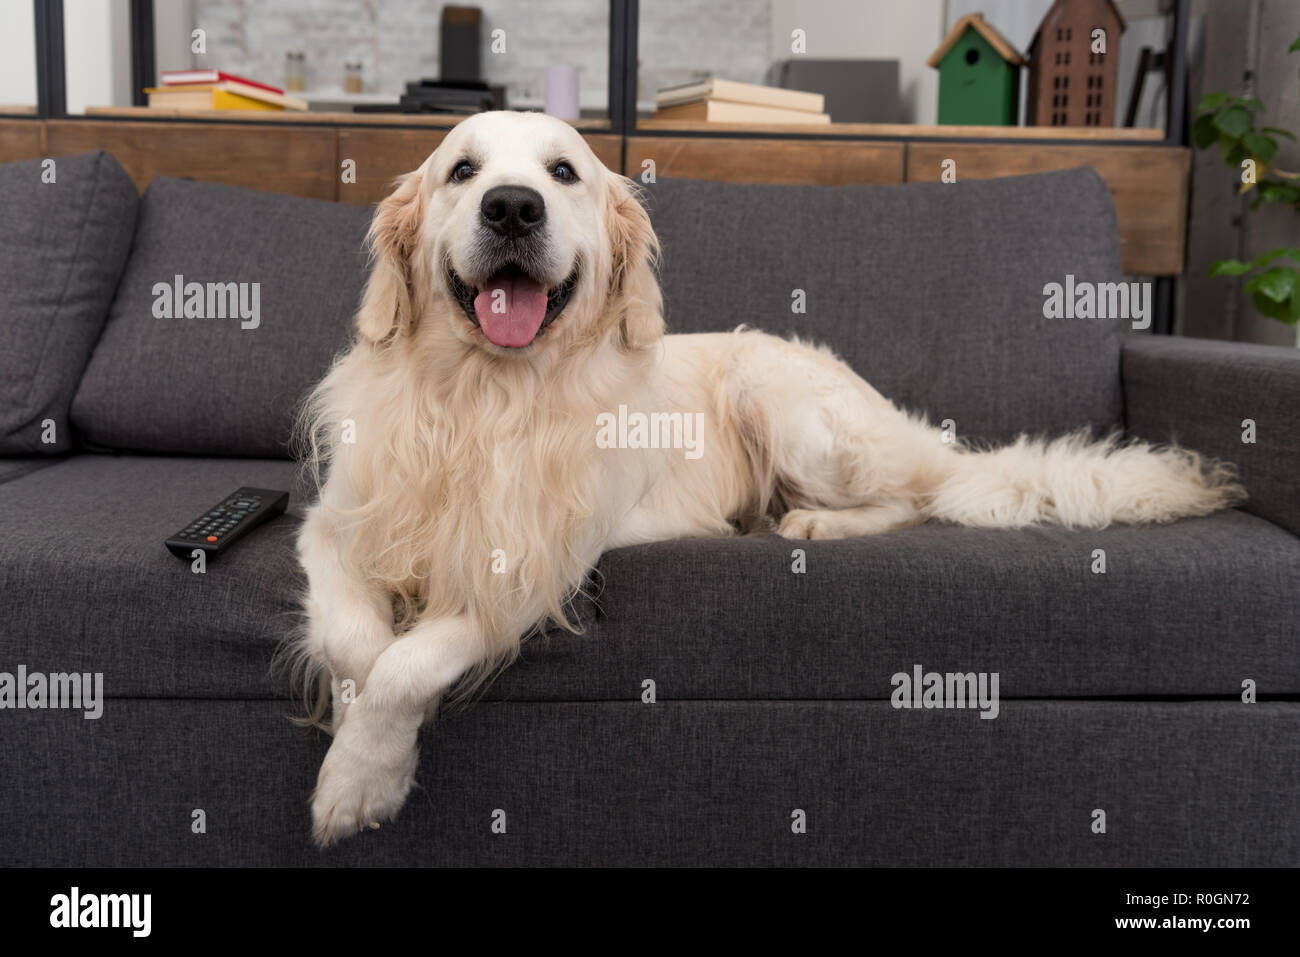 cute golden retriever lying on couch with tv remote control and looking at camera Stock Photo